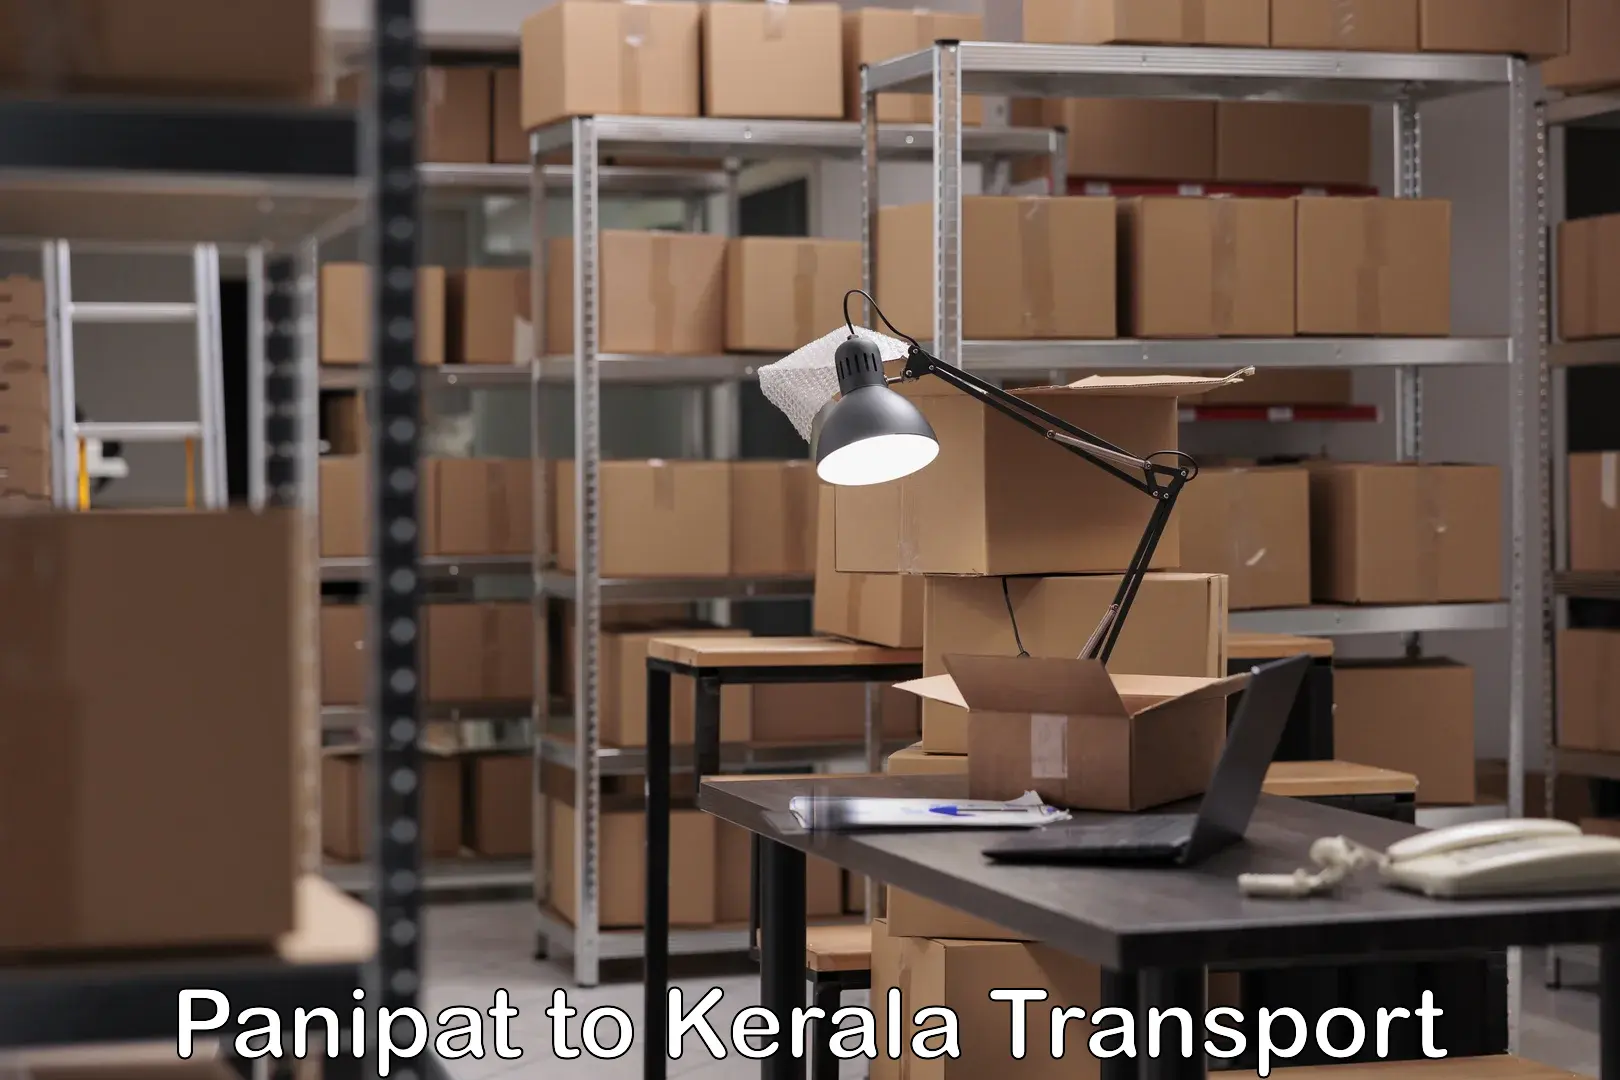 Transport bike from one state to another Panipat to Kottayam